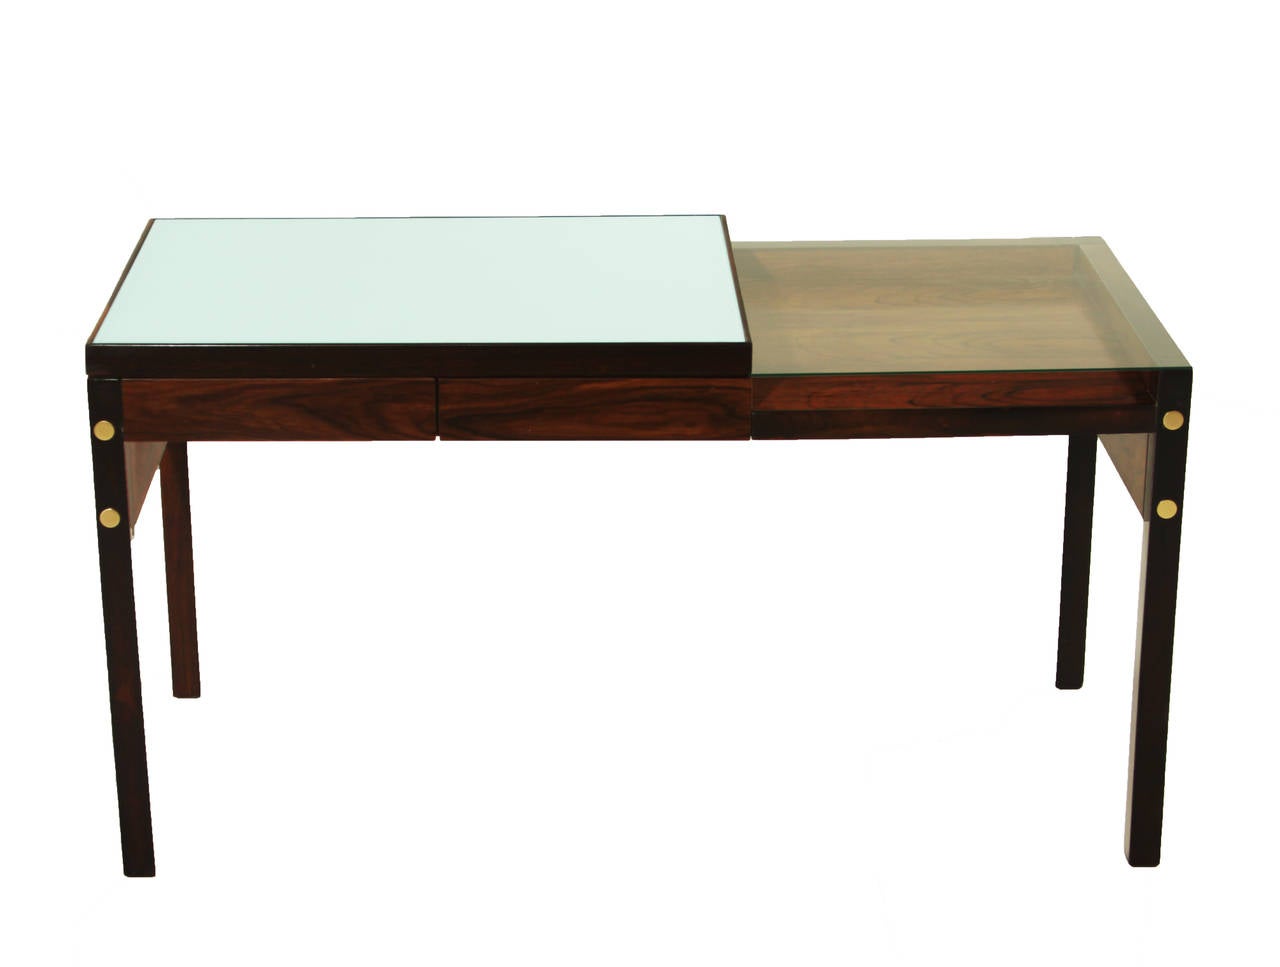 A stunning and rare two-tiered, glass top exotic hardwood desk by Brazil's Sergio Rodrigues. Top tier of the desk features reverse painted white glass and the lower tier is clear glass over a shallow cubby or display. The desk features two drawers